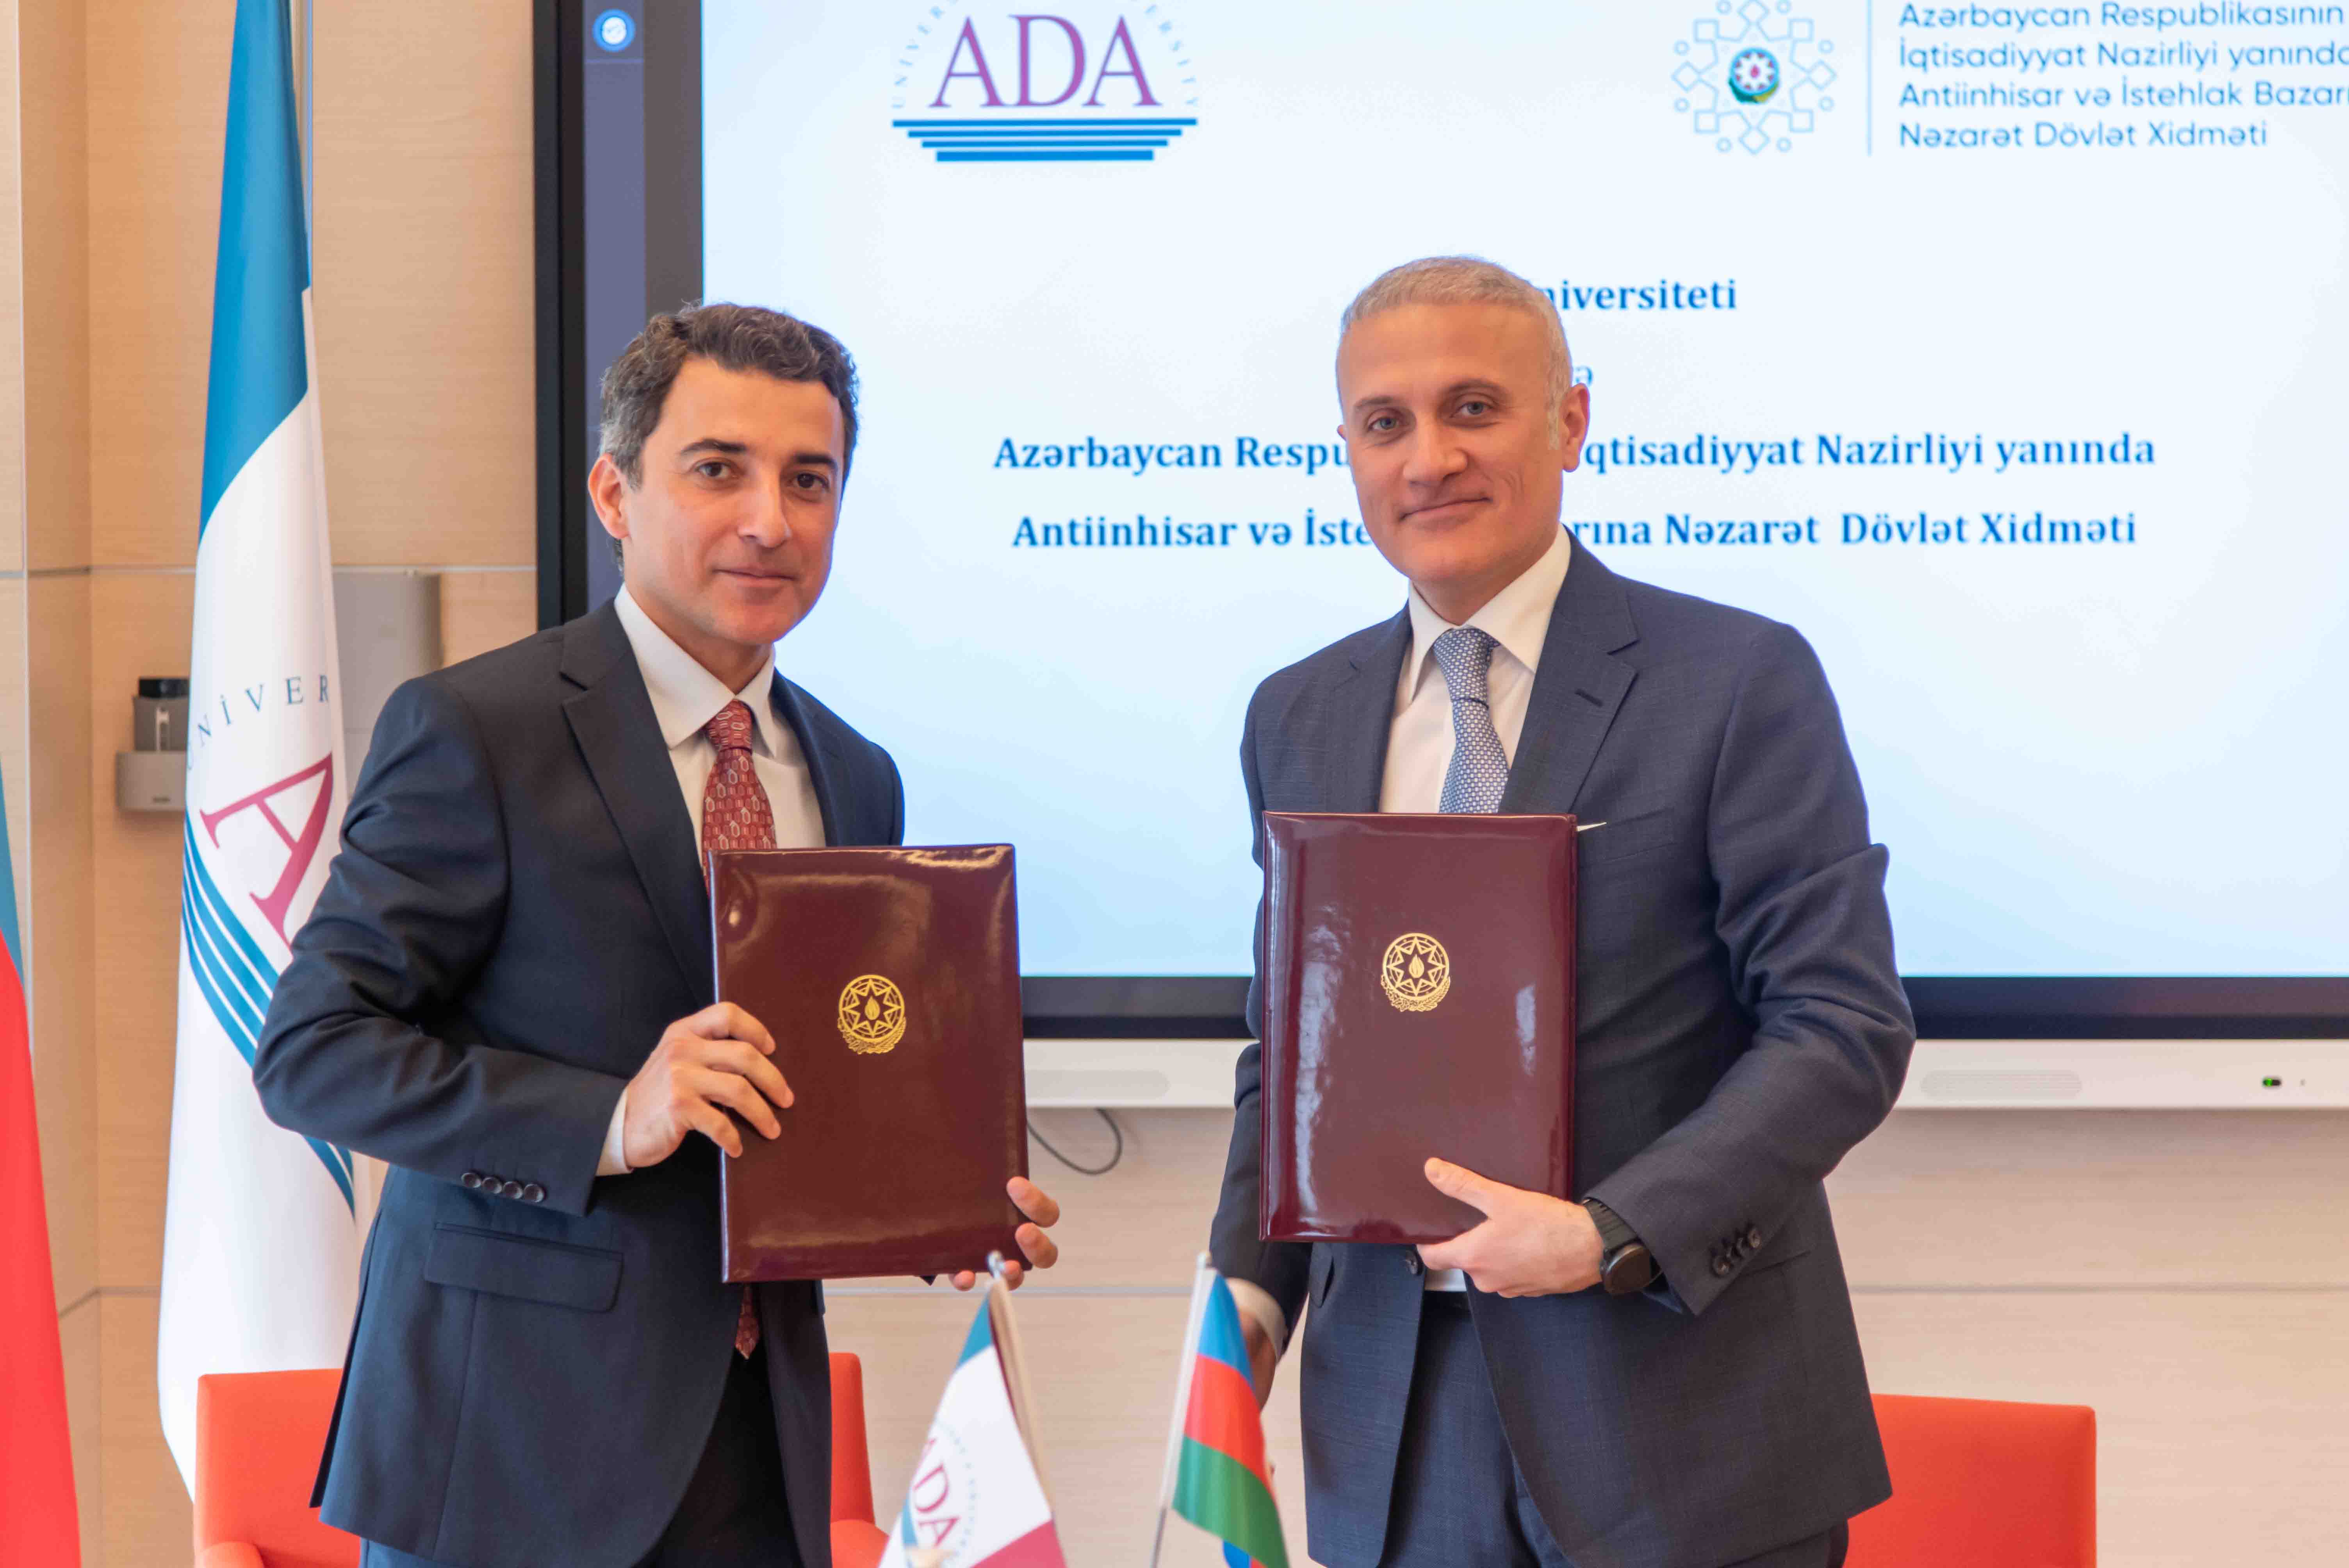 A Memorandum of Cooperation was signed between the State Service and ADA University